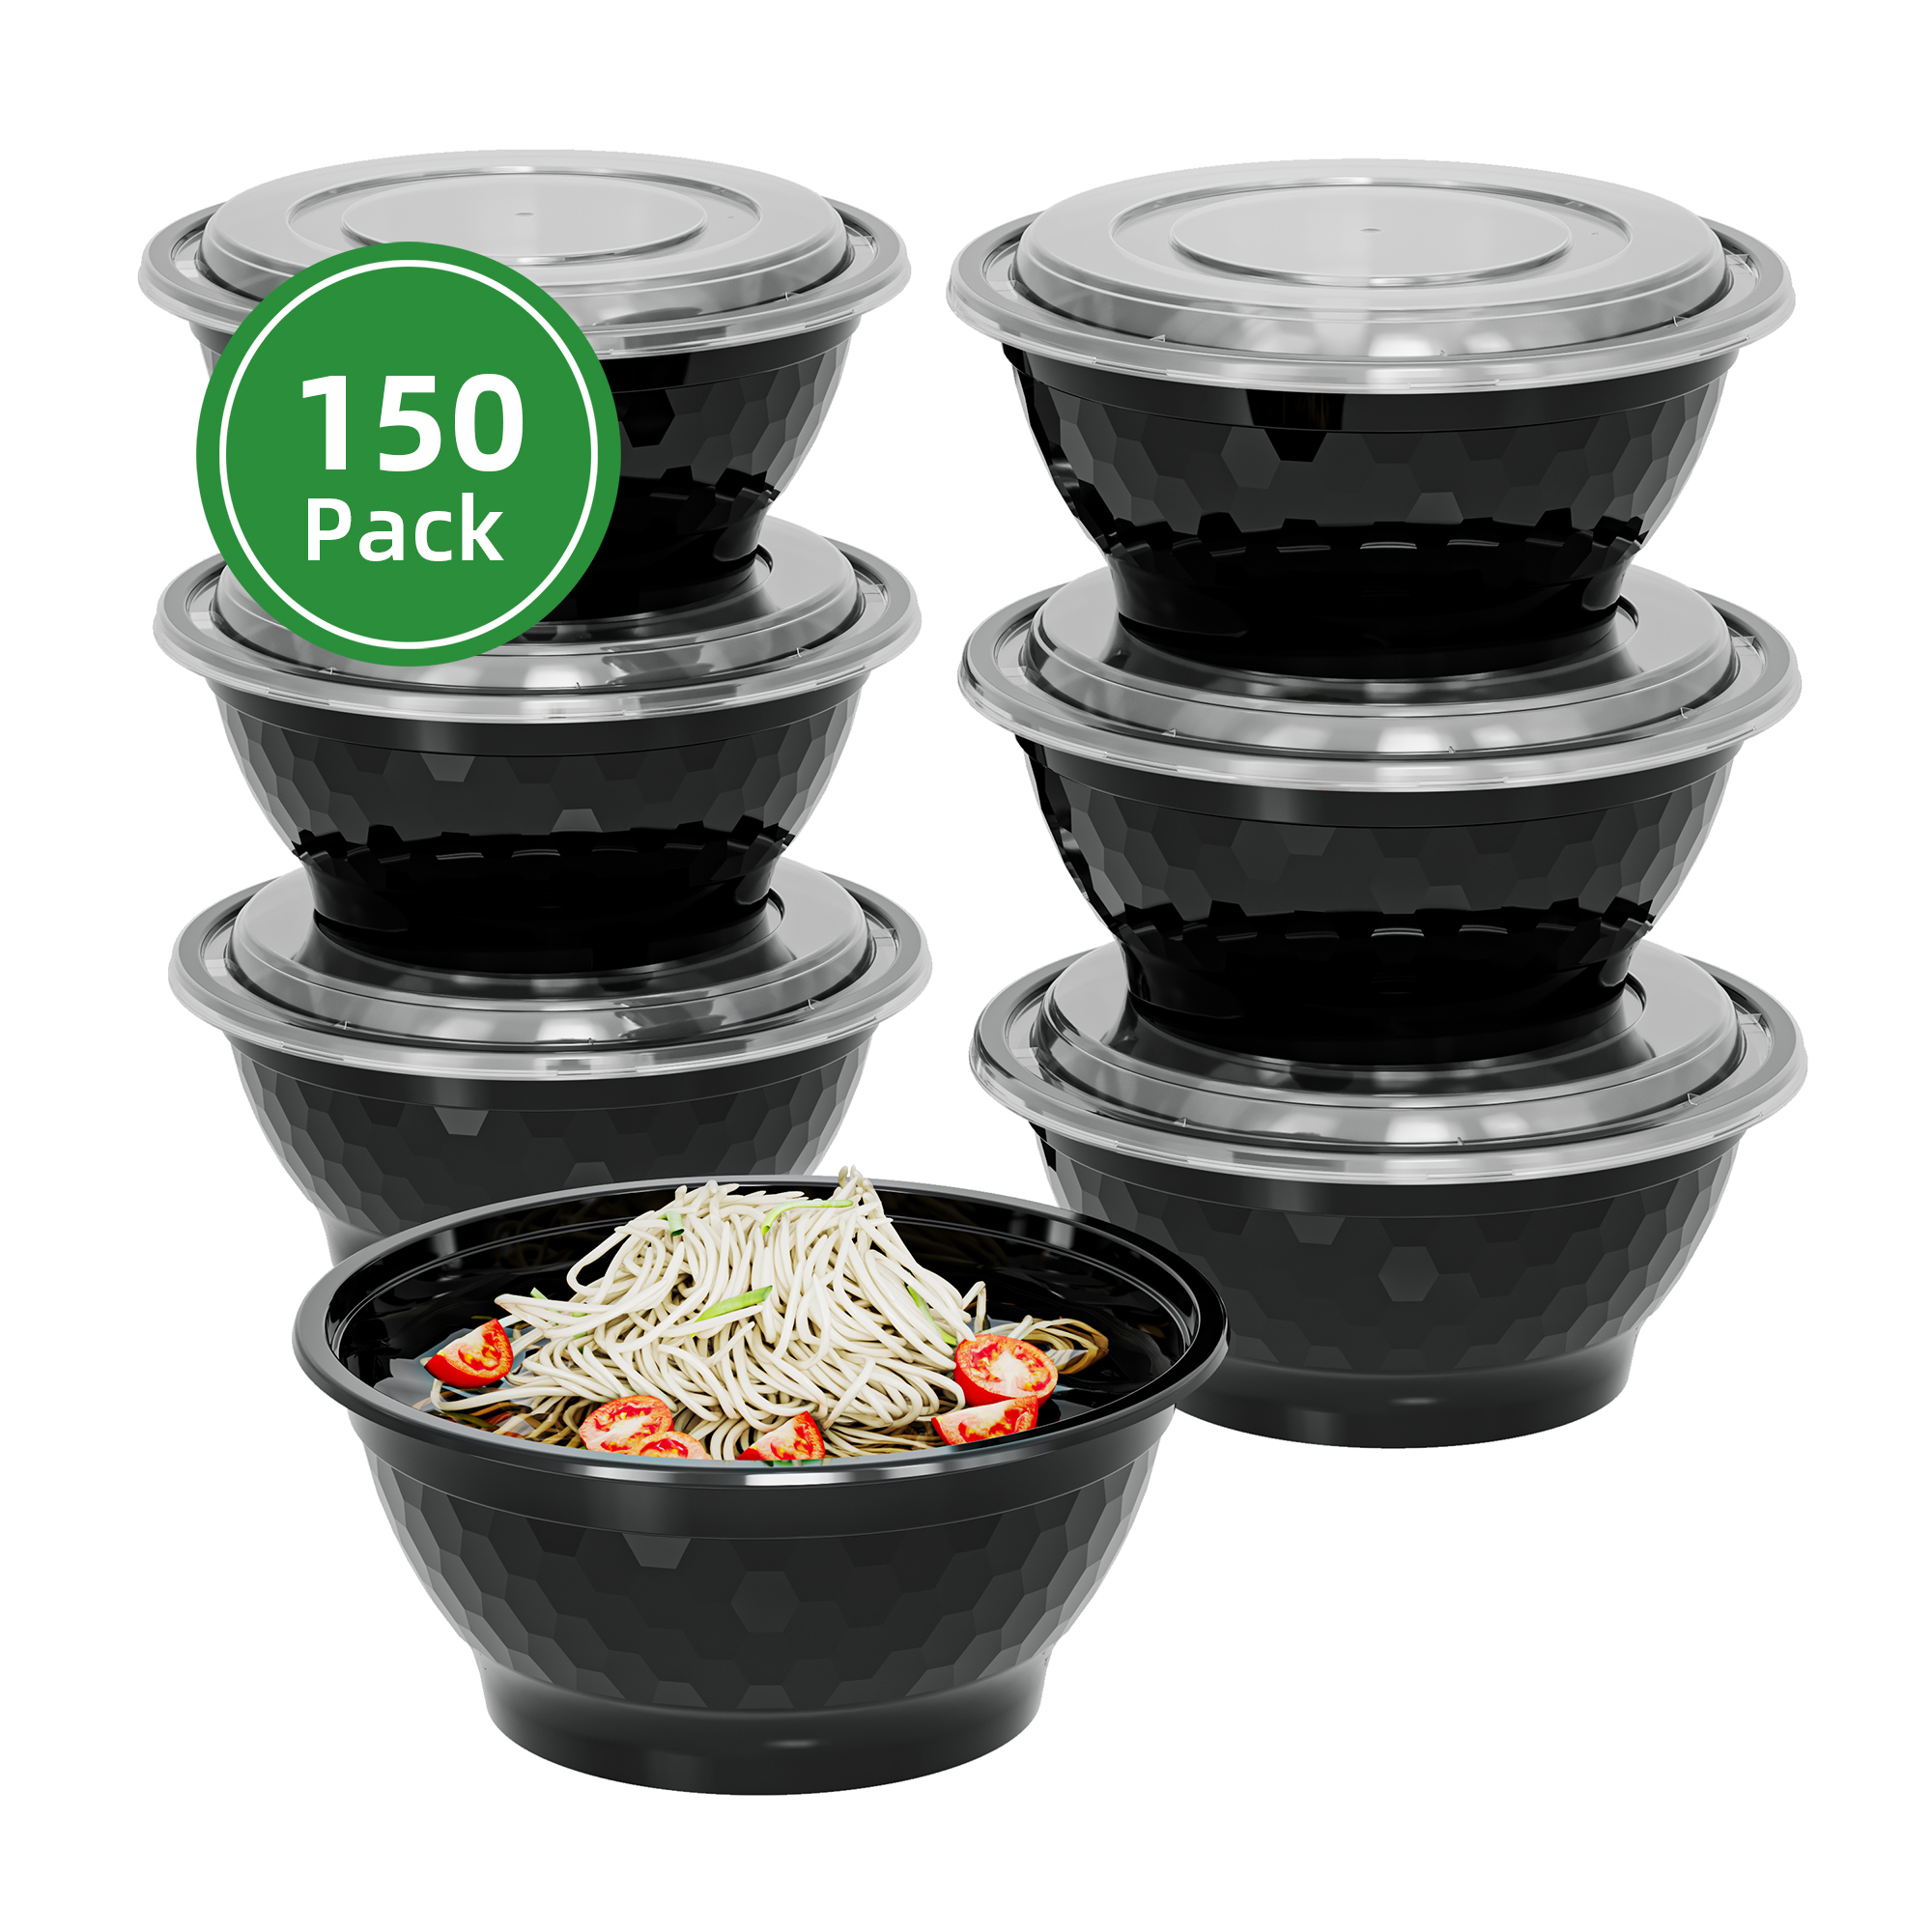 

150 Pack 38/42/48oz Meal Prep Bowls Containers - Large Disposable Plastic Bowls With Lids For Soup And Salad - Reusable To Go Food Storage Container - Bpa Free, Microwave/dishwasher/freezer Safe